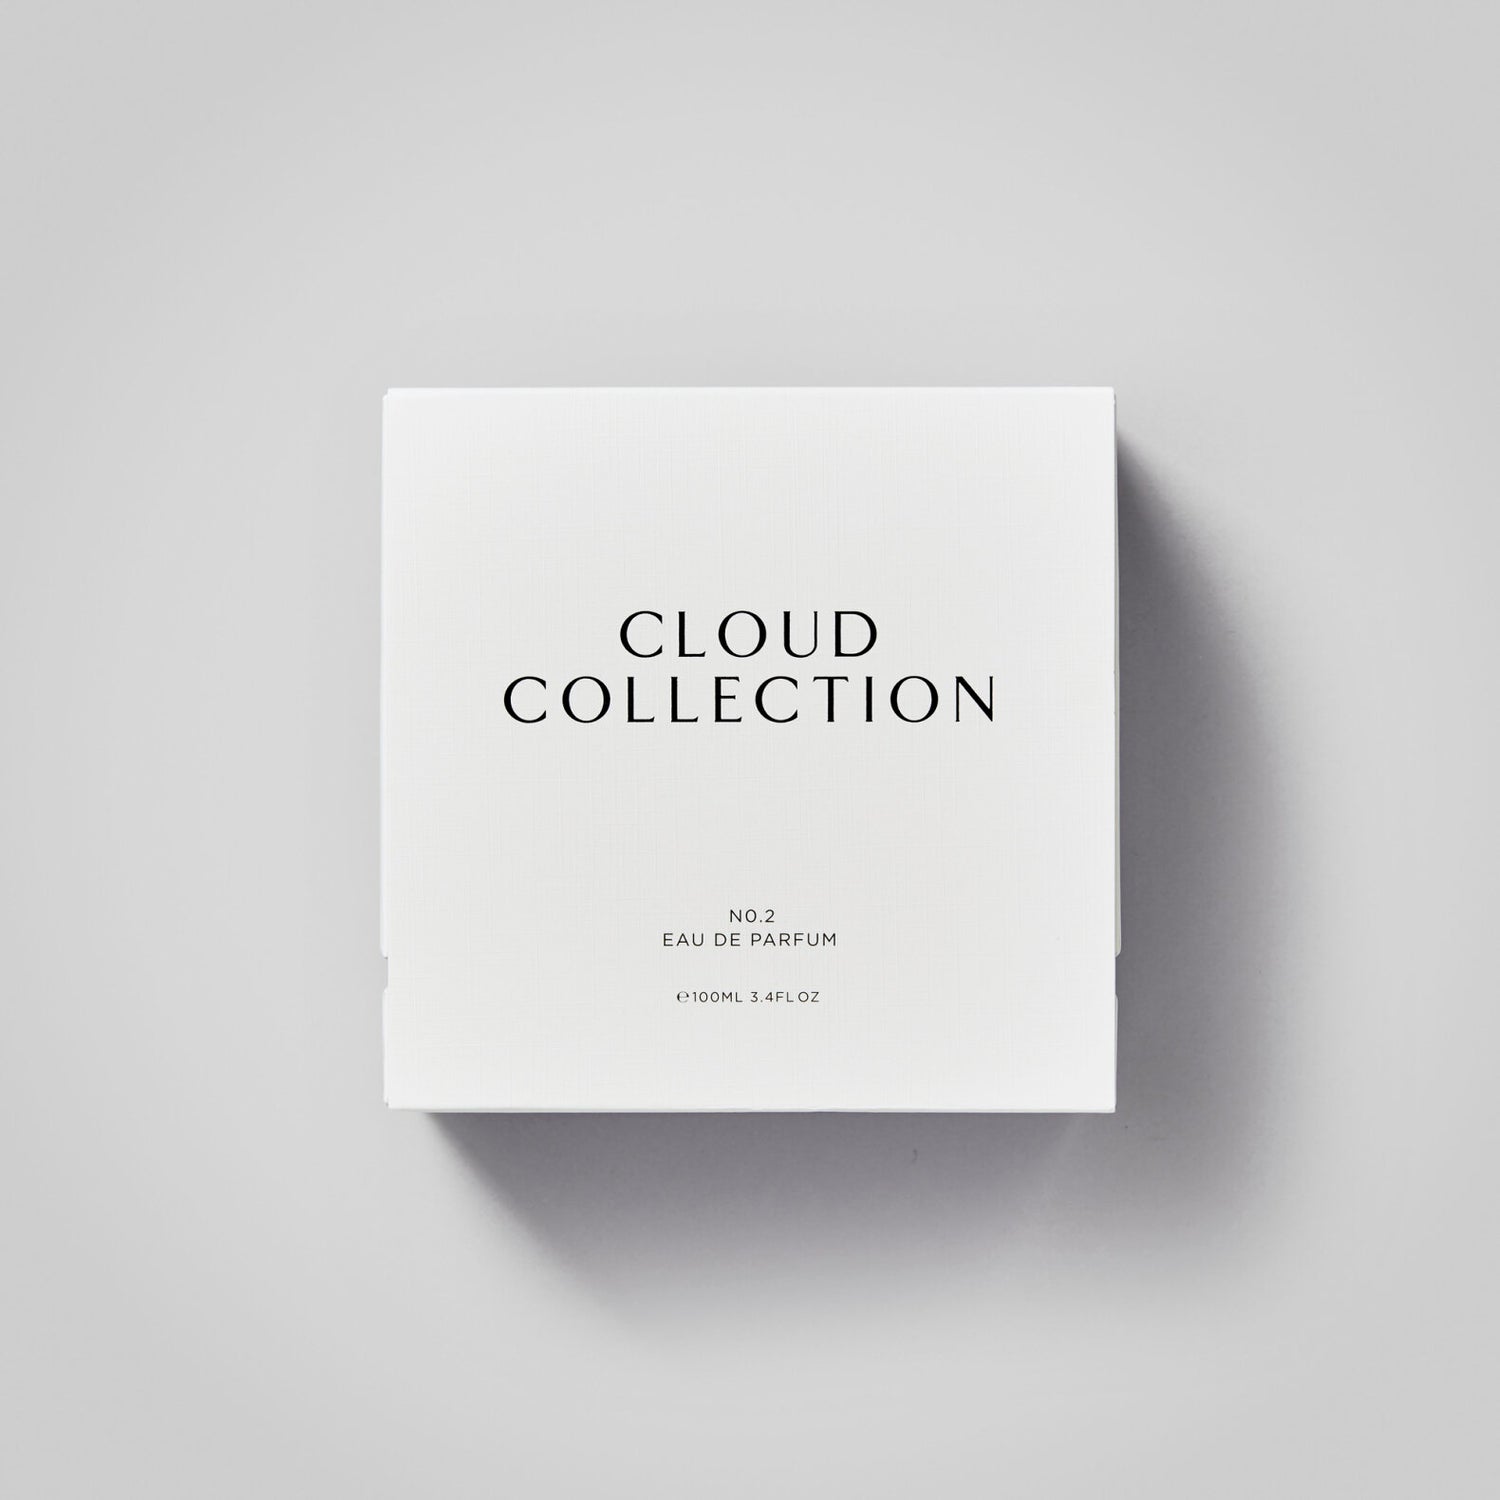 CLOUD COLLECTION No.2 100ml